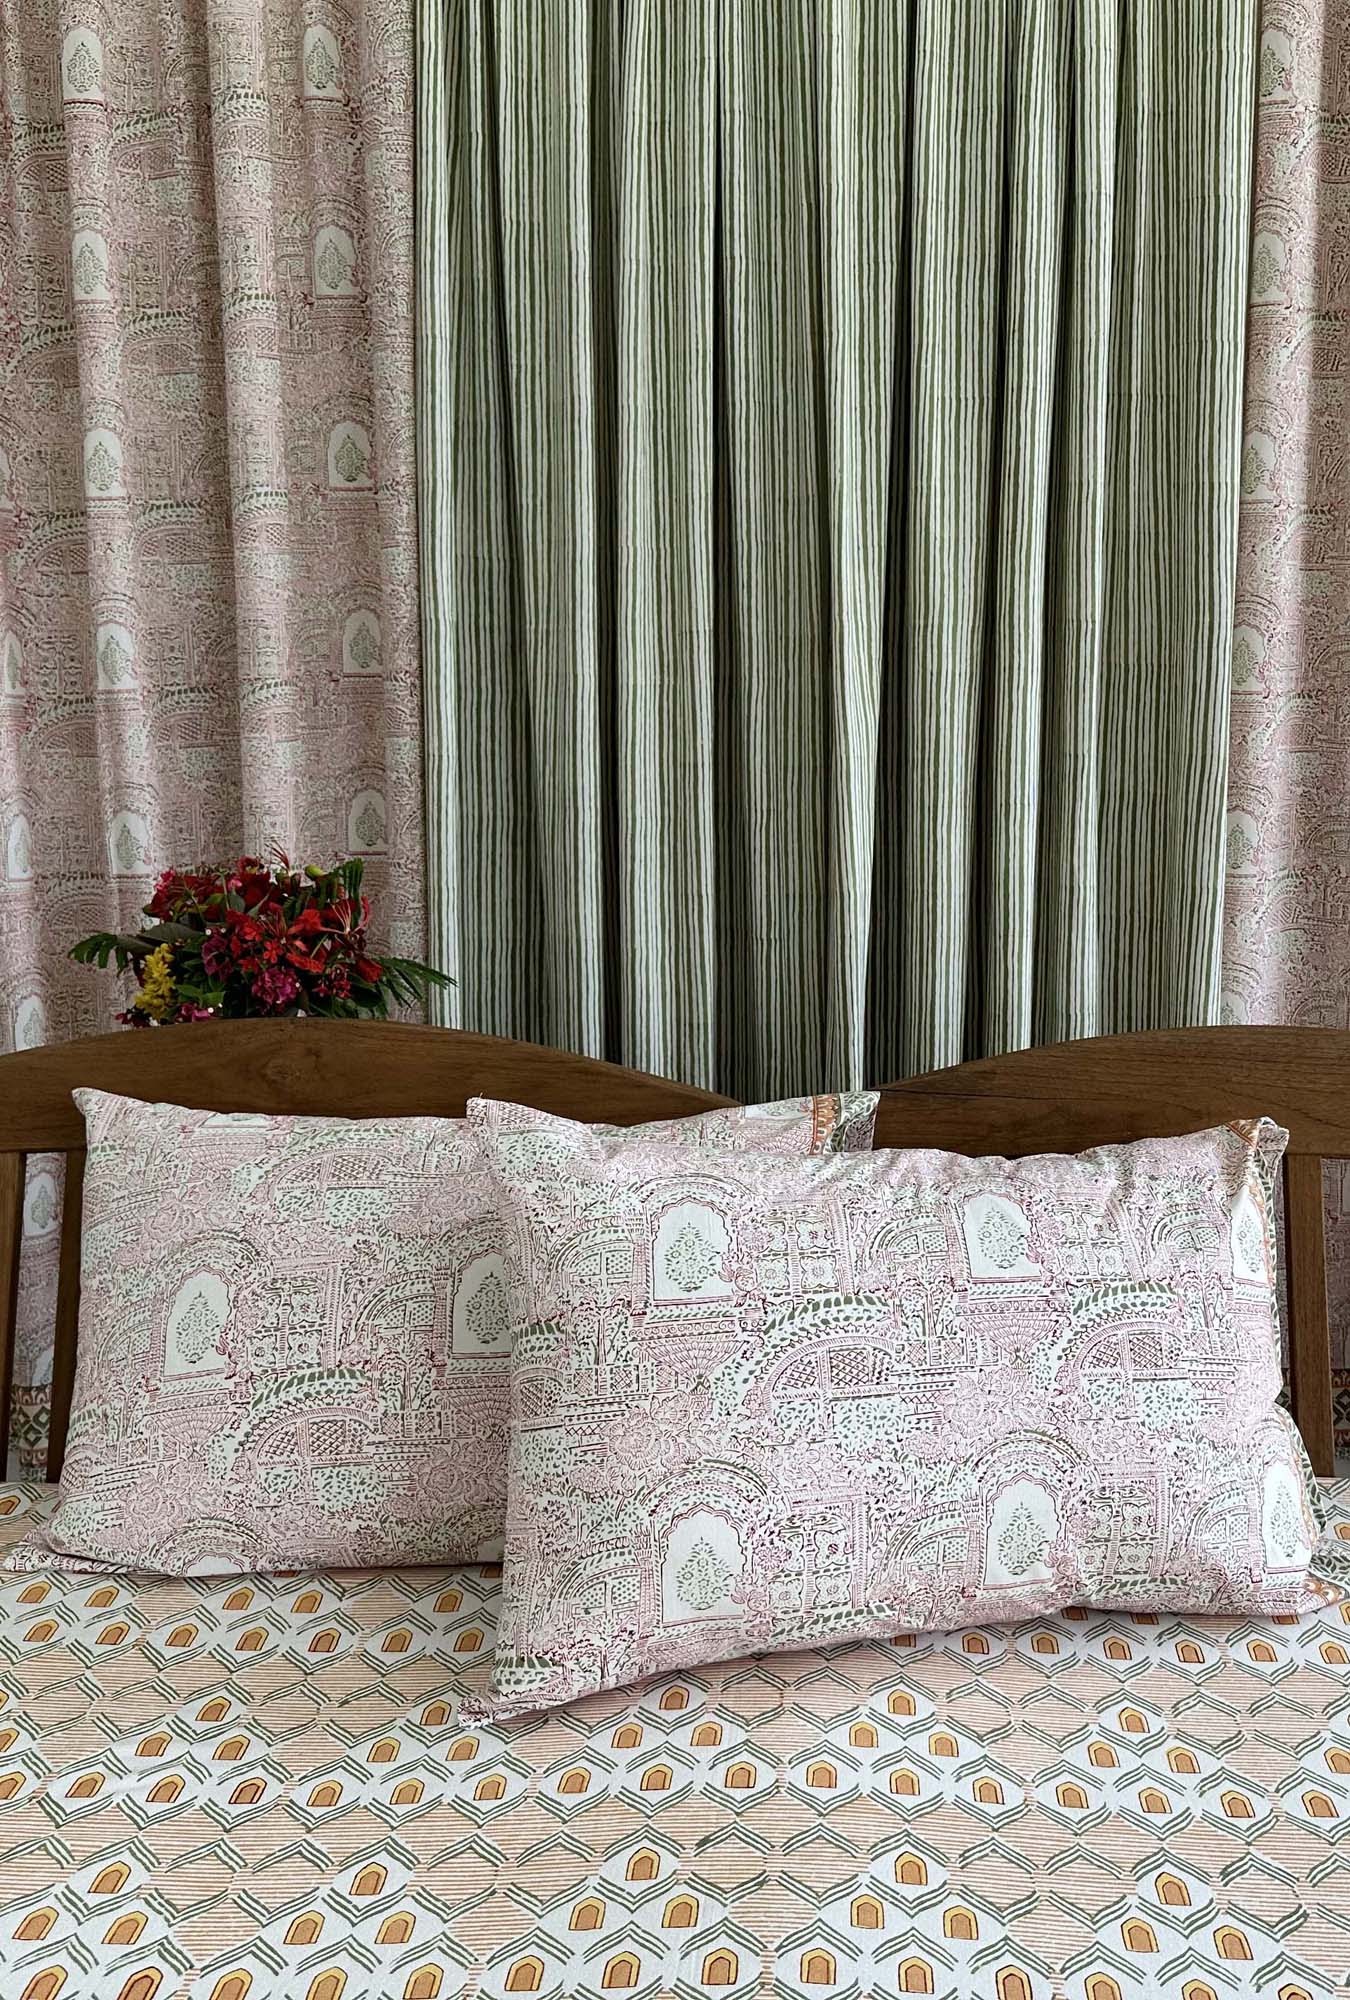 Buy Hand Block Printed Pillow Covers Online